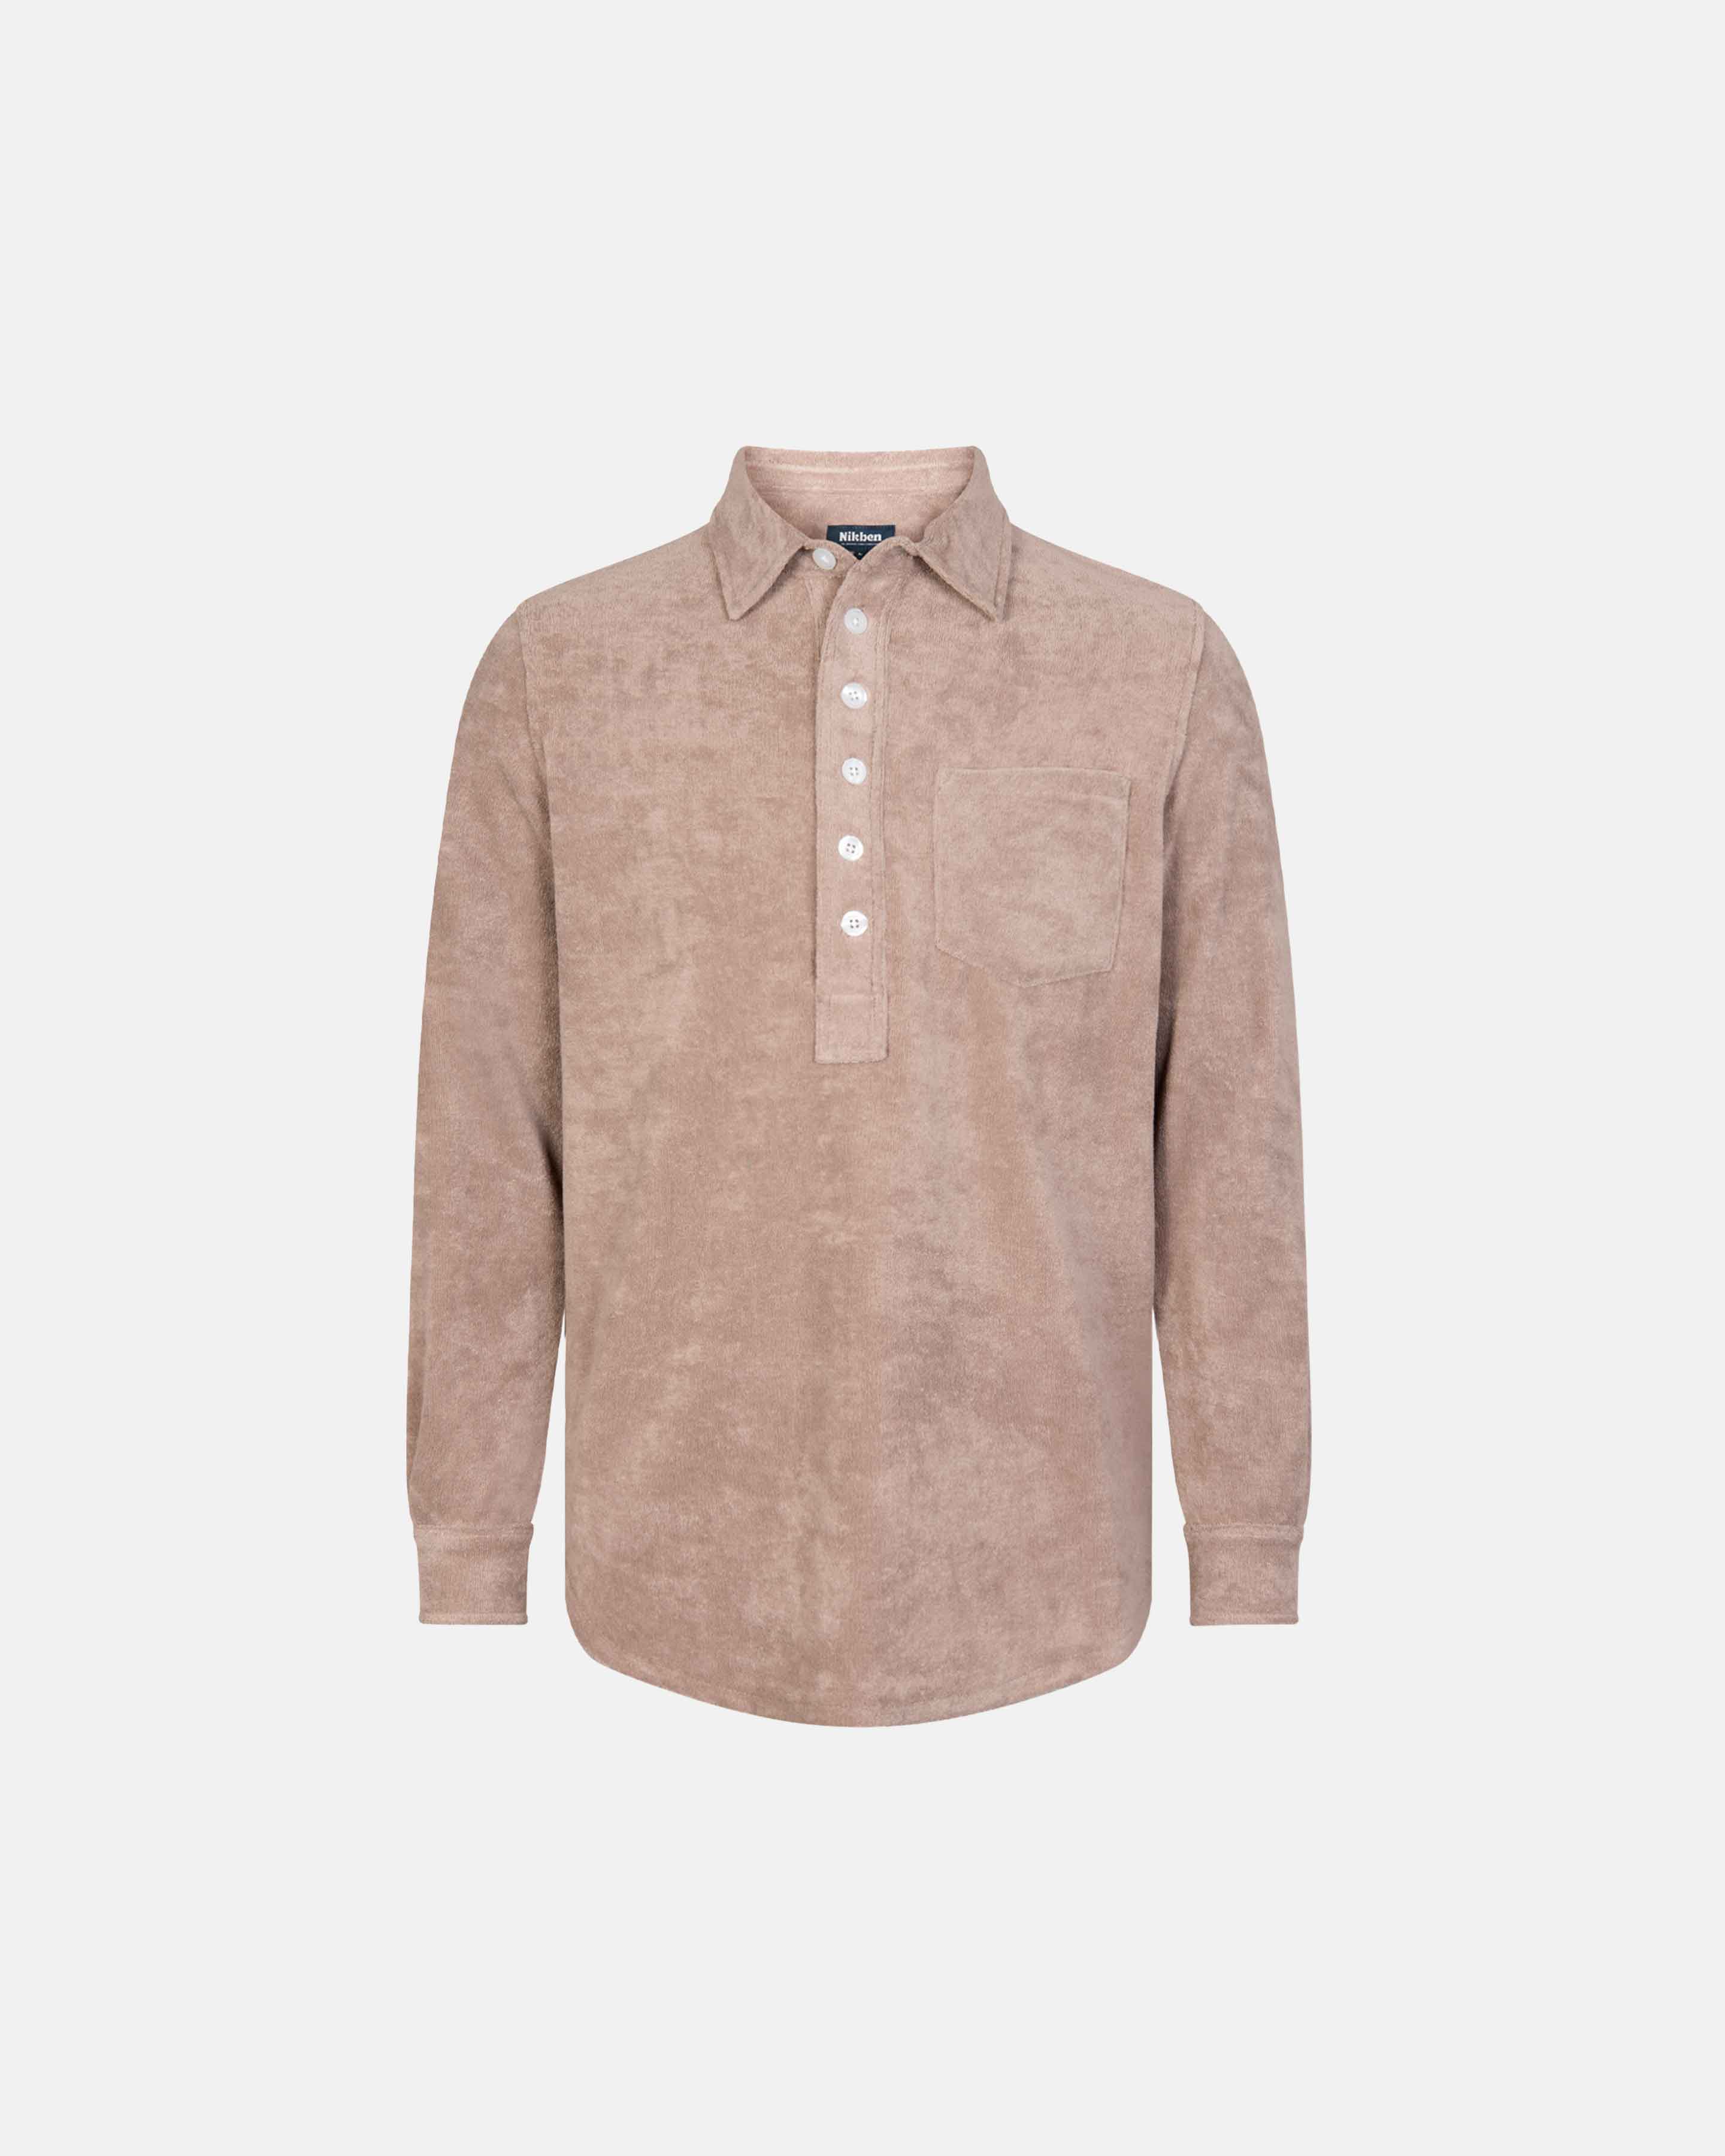 Light brown long sleeve shirt in terry toweling fabric with half button closure and one chest pocket